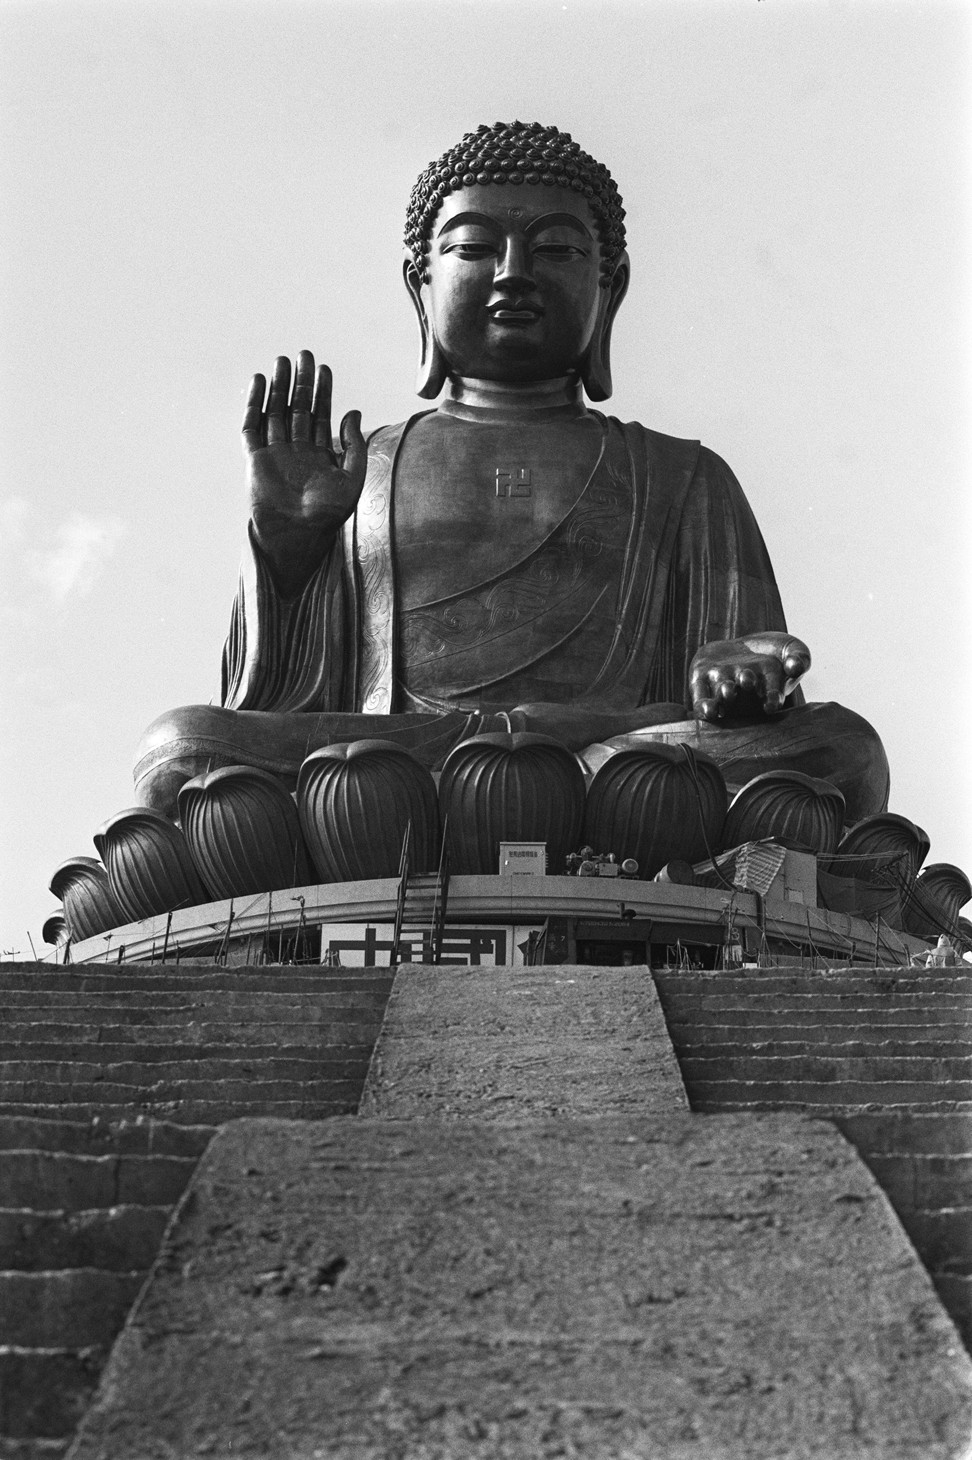 The Big Buddha statue at Po Lin Monastery ready for its official unveiling. Photo: P. Y. Tang